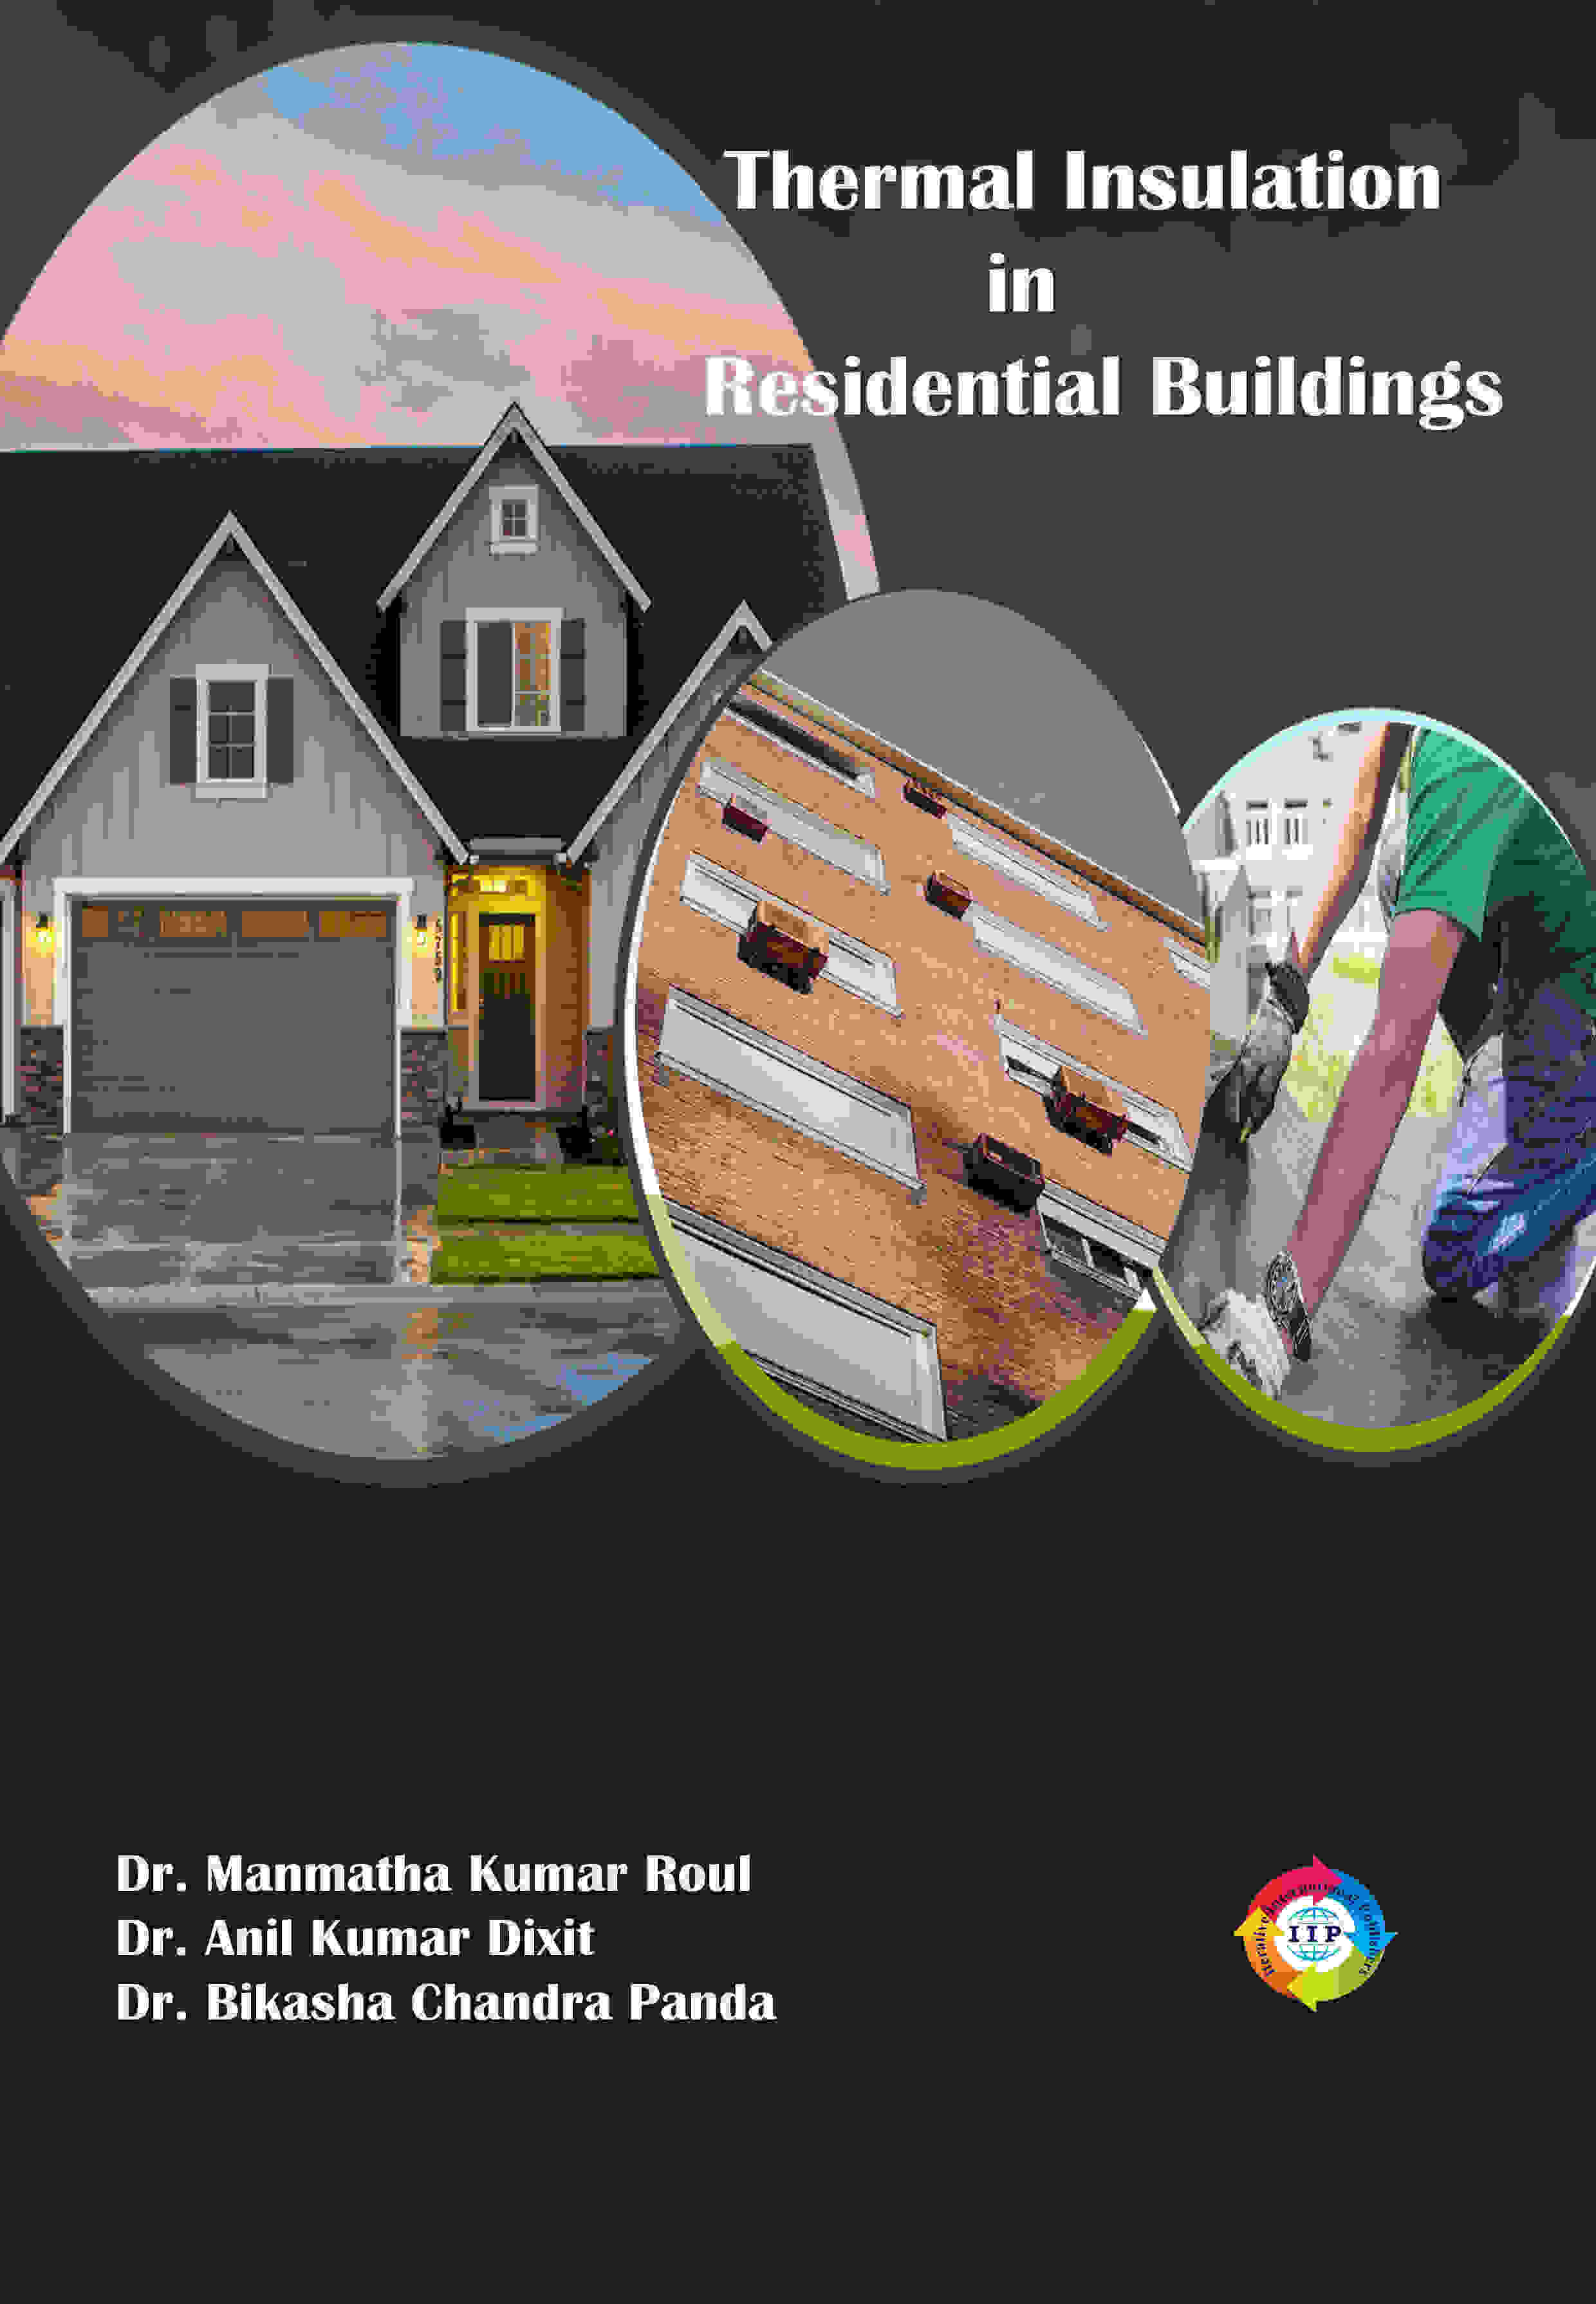 THERMAL INSULATION IN RESIDENTIAL BUILDINGS